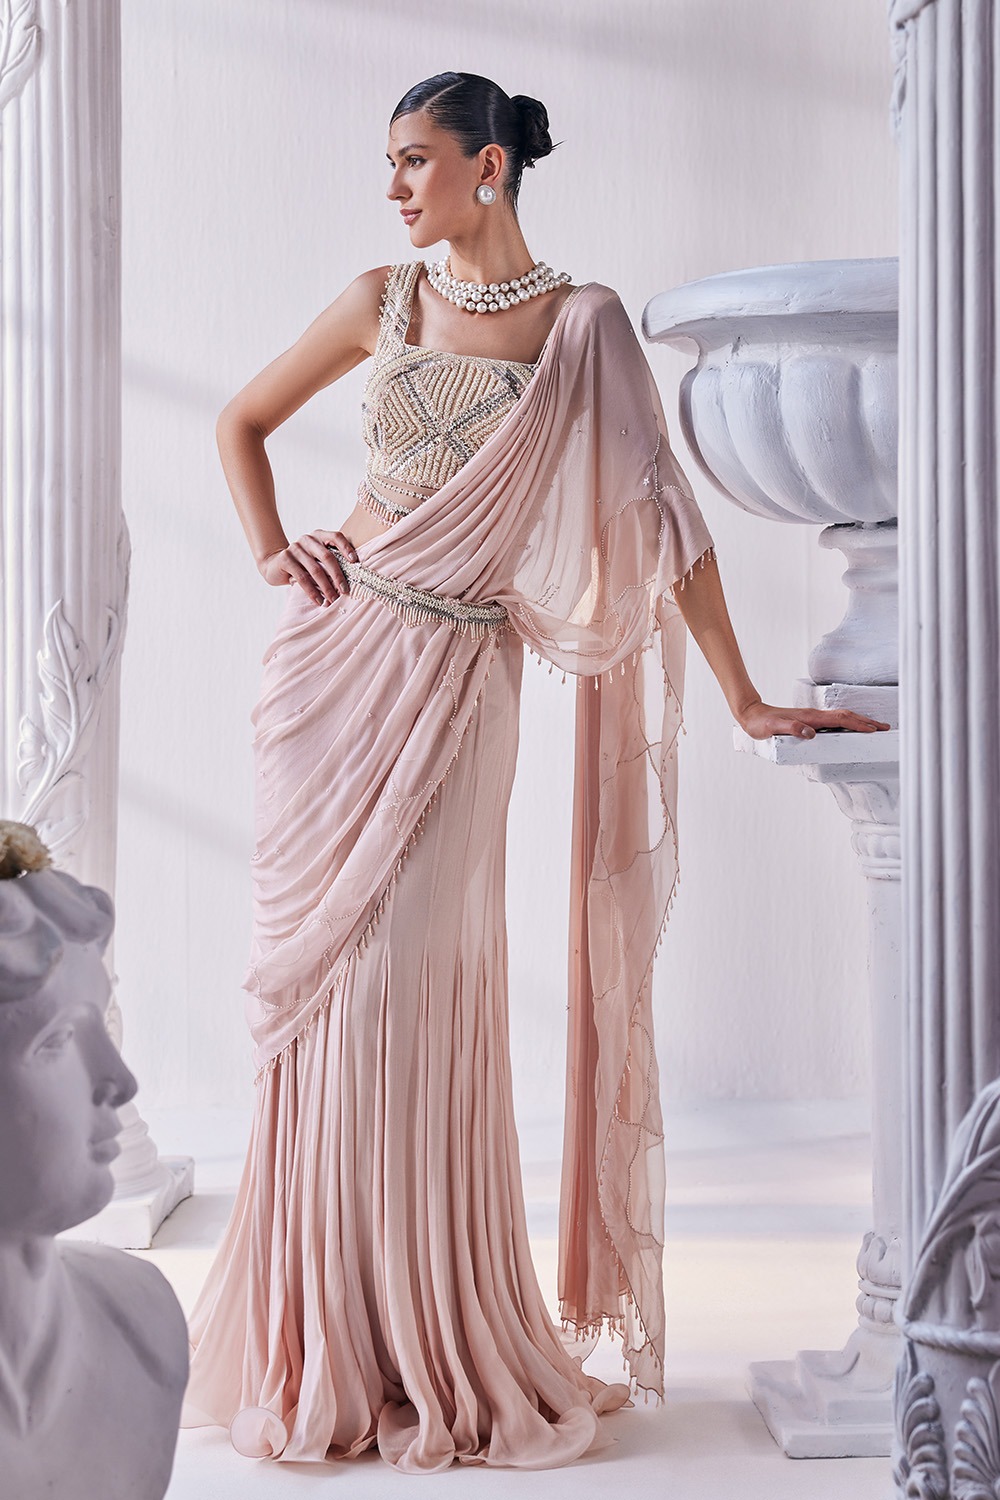 Peach Chiffon Drape Saree With a Heavy Emroidered Blouse And a Belt